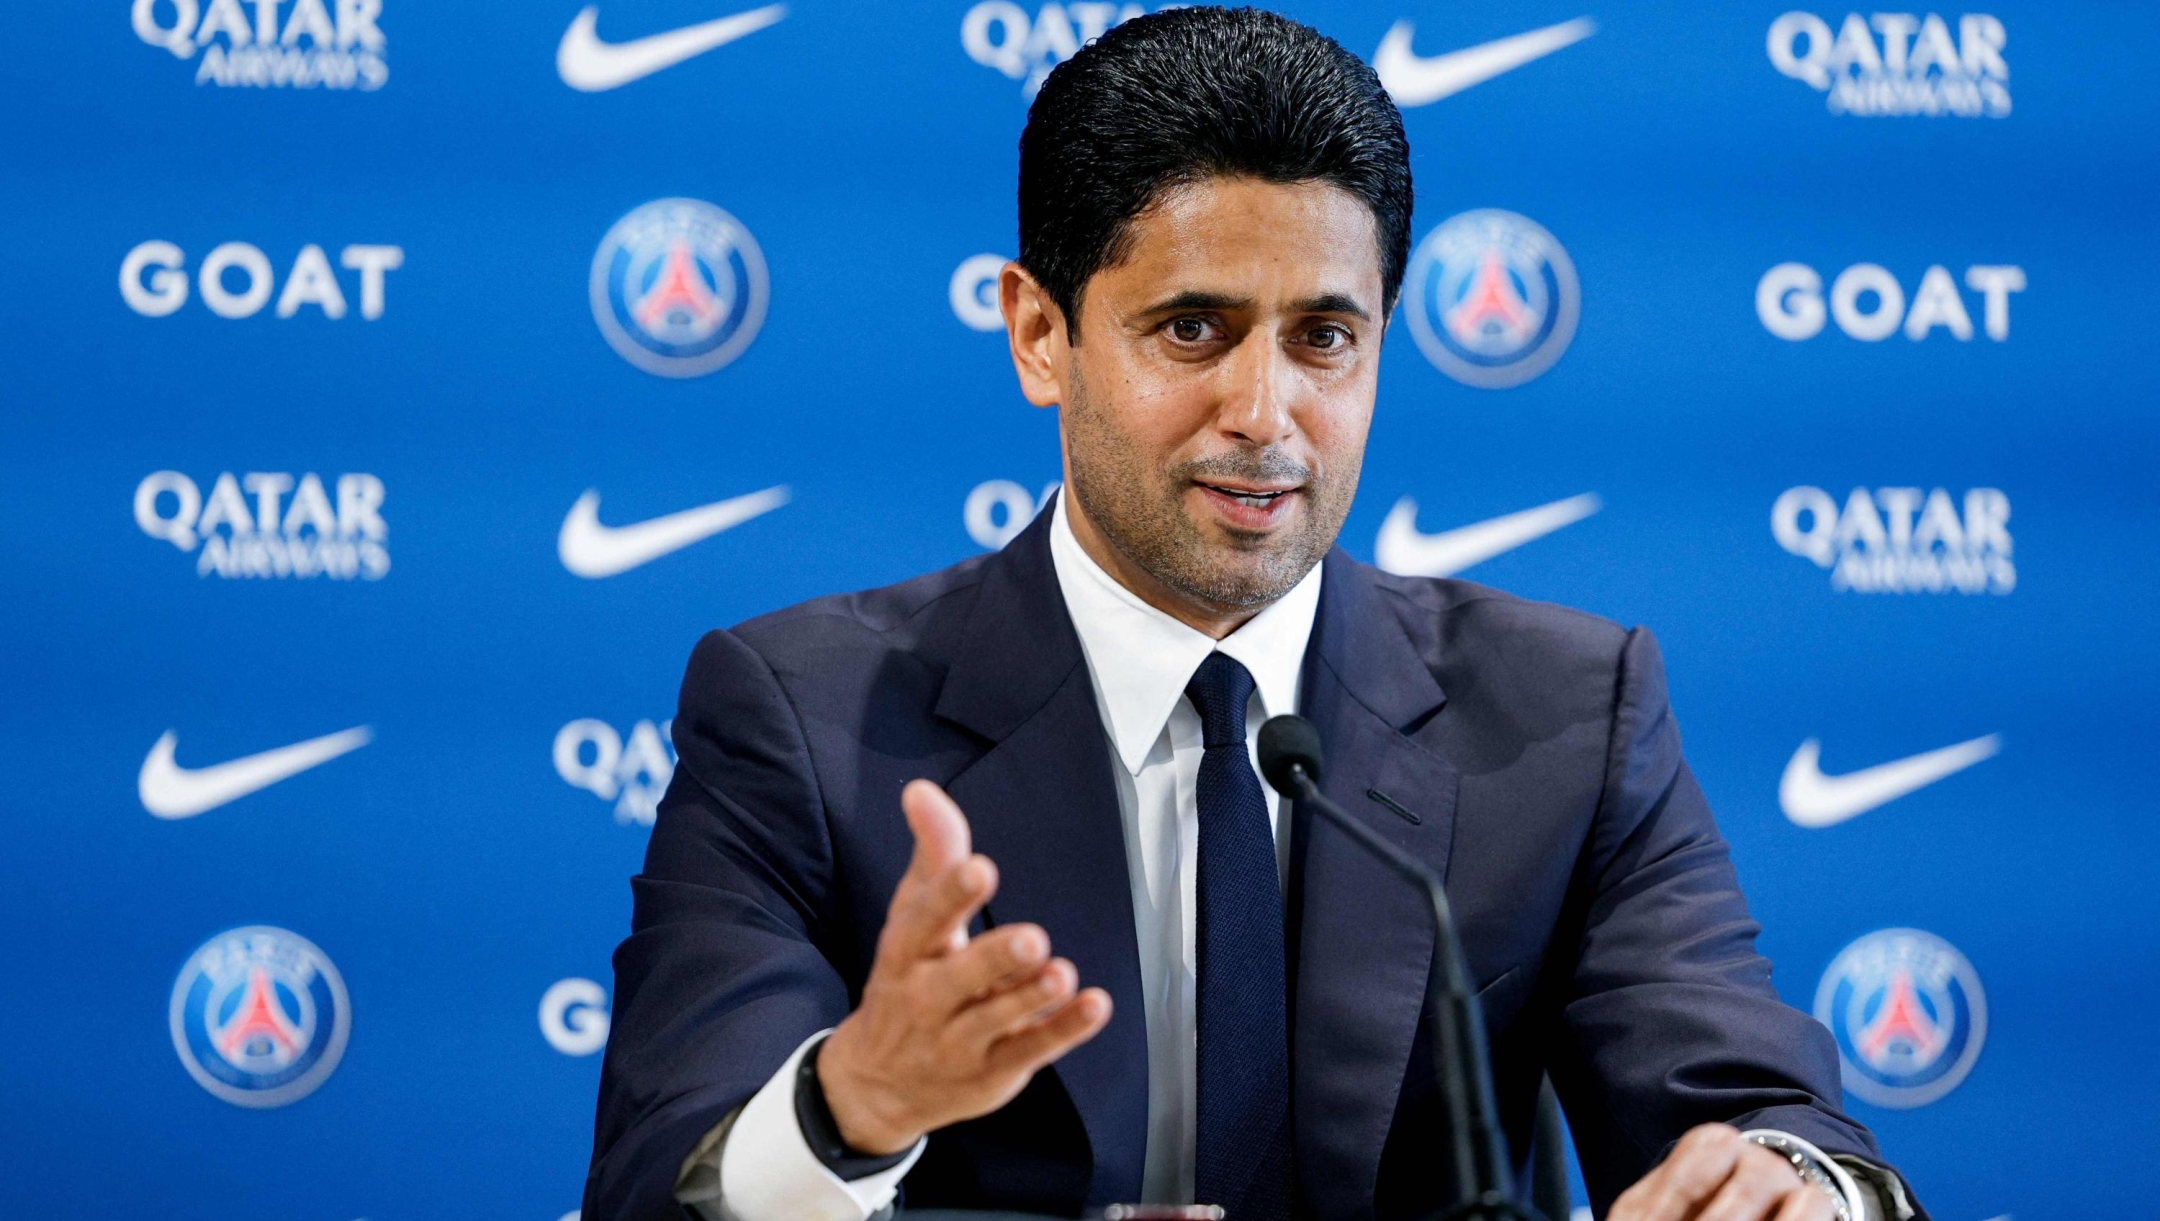 Paris Saint Germain's Qatari president Nasser al-Khelaifi speaks during a press conference to announce the presentation of the new coach, at the new 'campus' of French L1 Paris Saint-Germain (PSG) football club at Poissy, west of Paris on July 5, 2023. Former Barcelona and Spain coach Luis Enrique has been appointed as the new coach of Paris Saint-Germain on a two-year deal, the French champions announced on July 5, 2023. (Photo by Geoffroy VAN DER HASSELT / AFP)